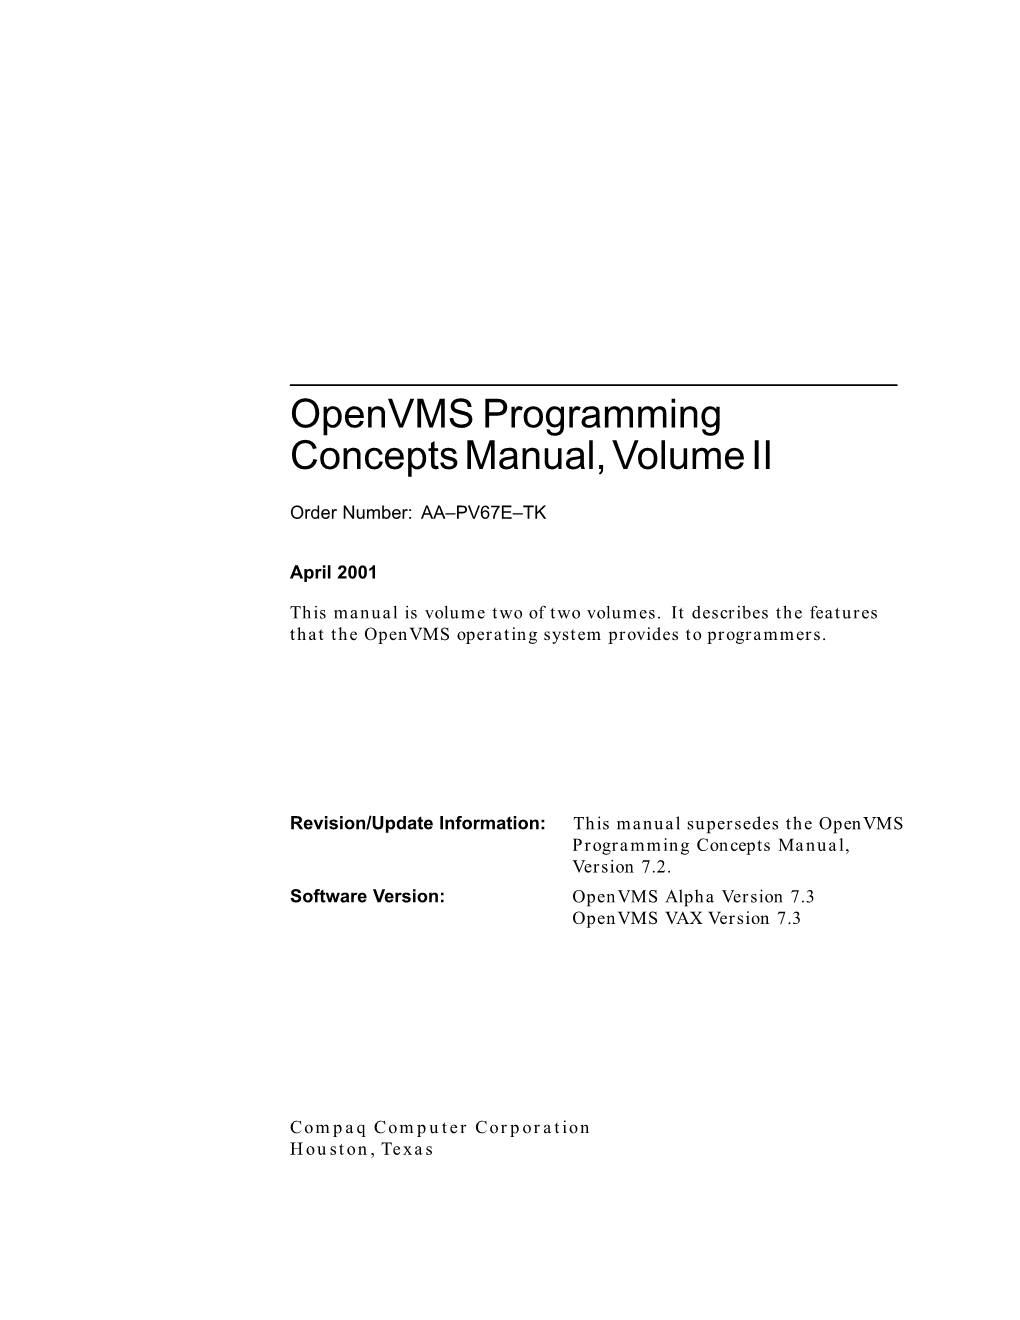 Openvms Programming Concepts Manual, Vol. 2